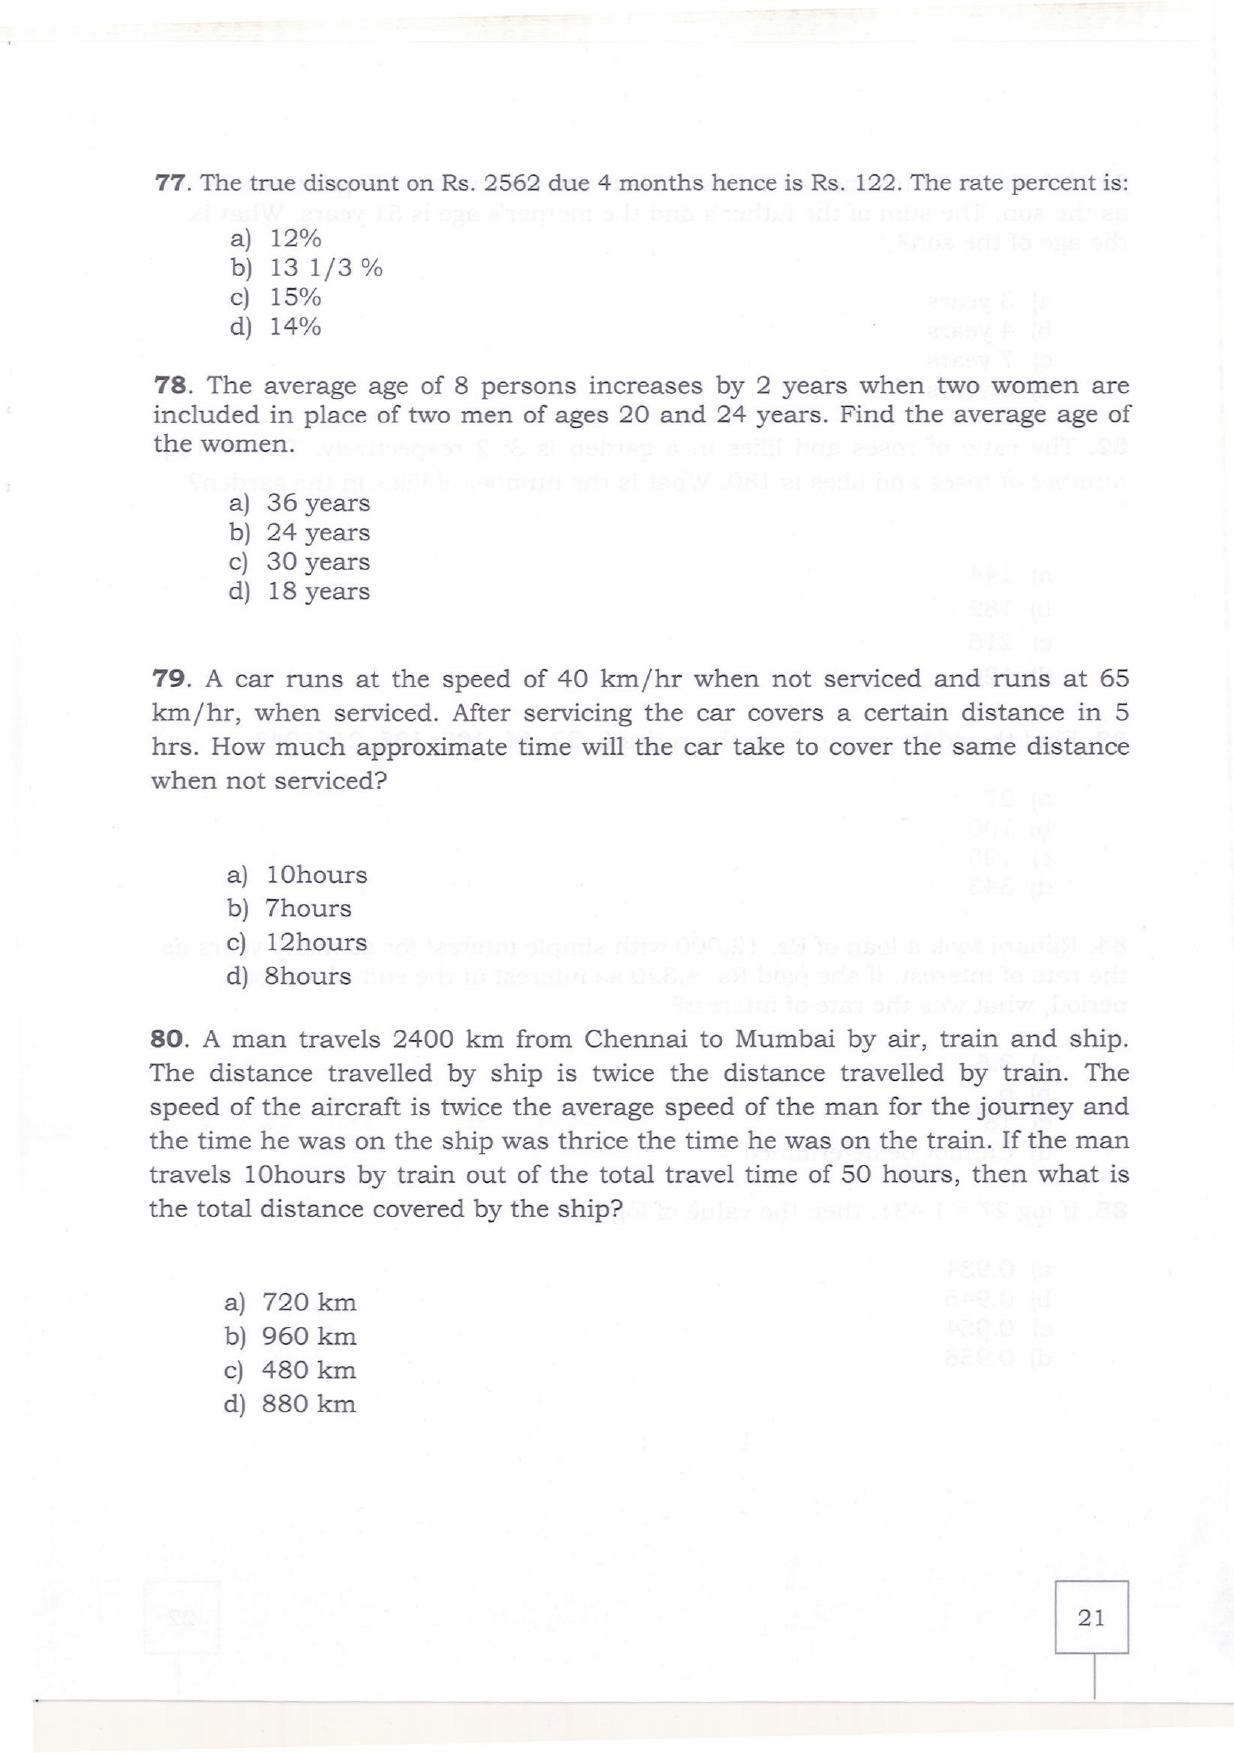 KMAT Question Papers - February 2019 - Page 19